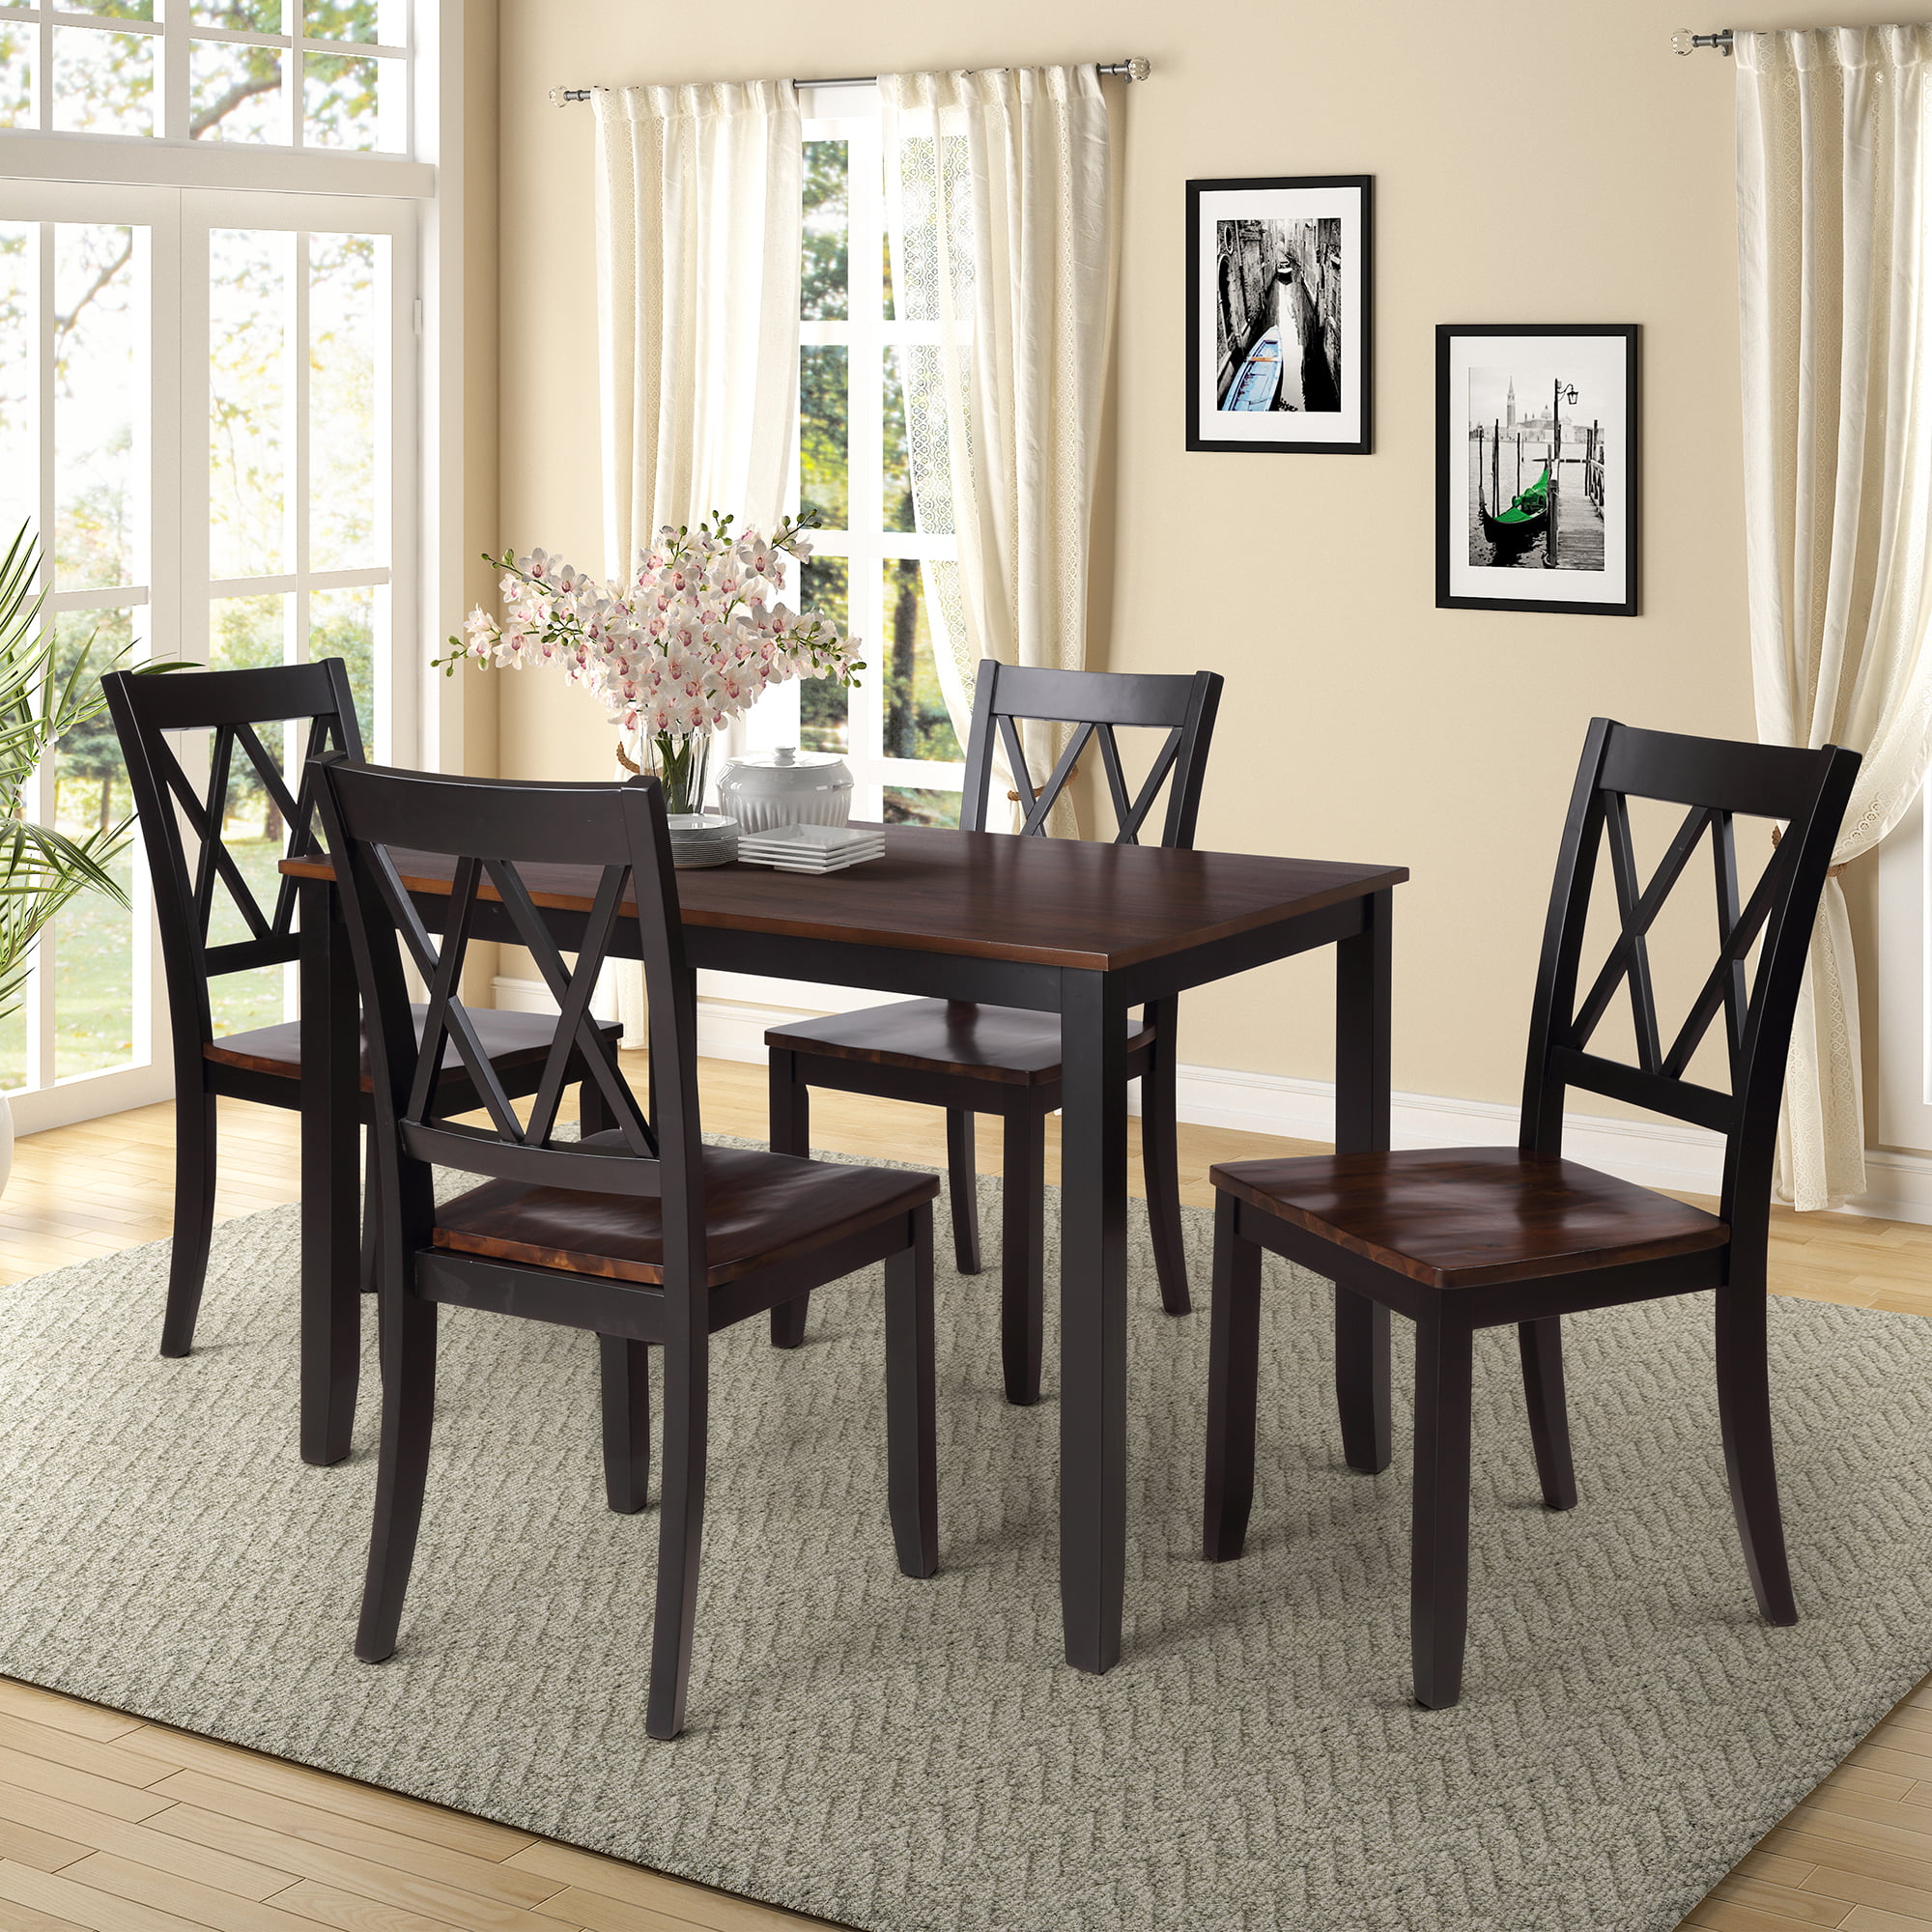 Modern 5 Piece Dining Sets, URHOMEPRO Wooden Dining Table Set for 4 ...